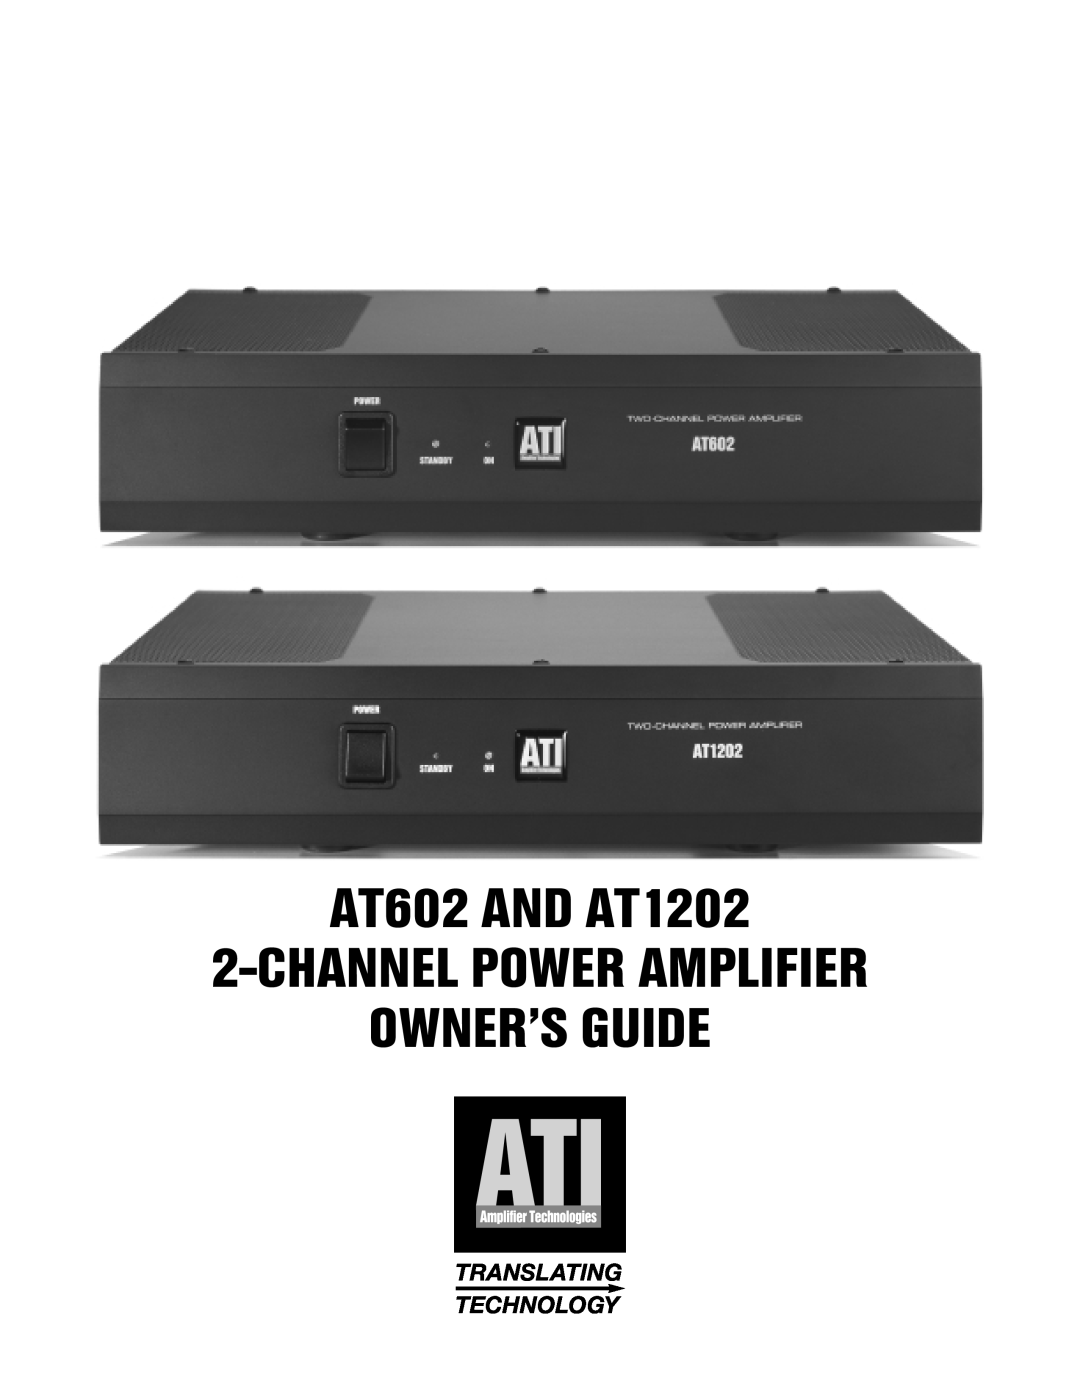 Amplifier Tech manual AT602 AND AT1202, Owner’S Guide, Channelpower Amplifier, Translating, Technology 